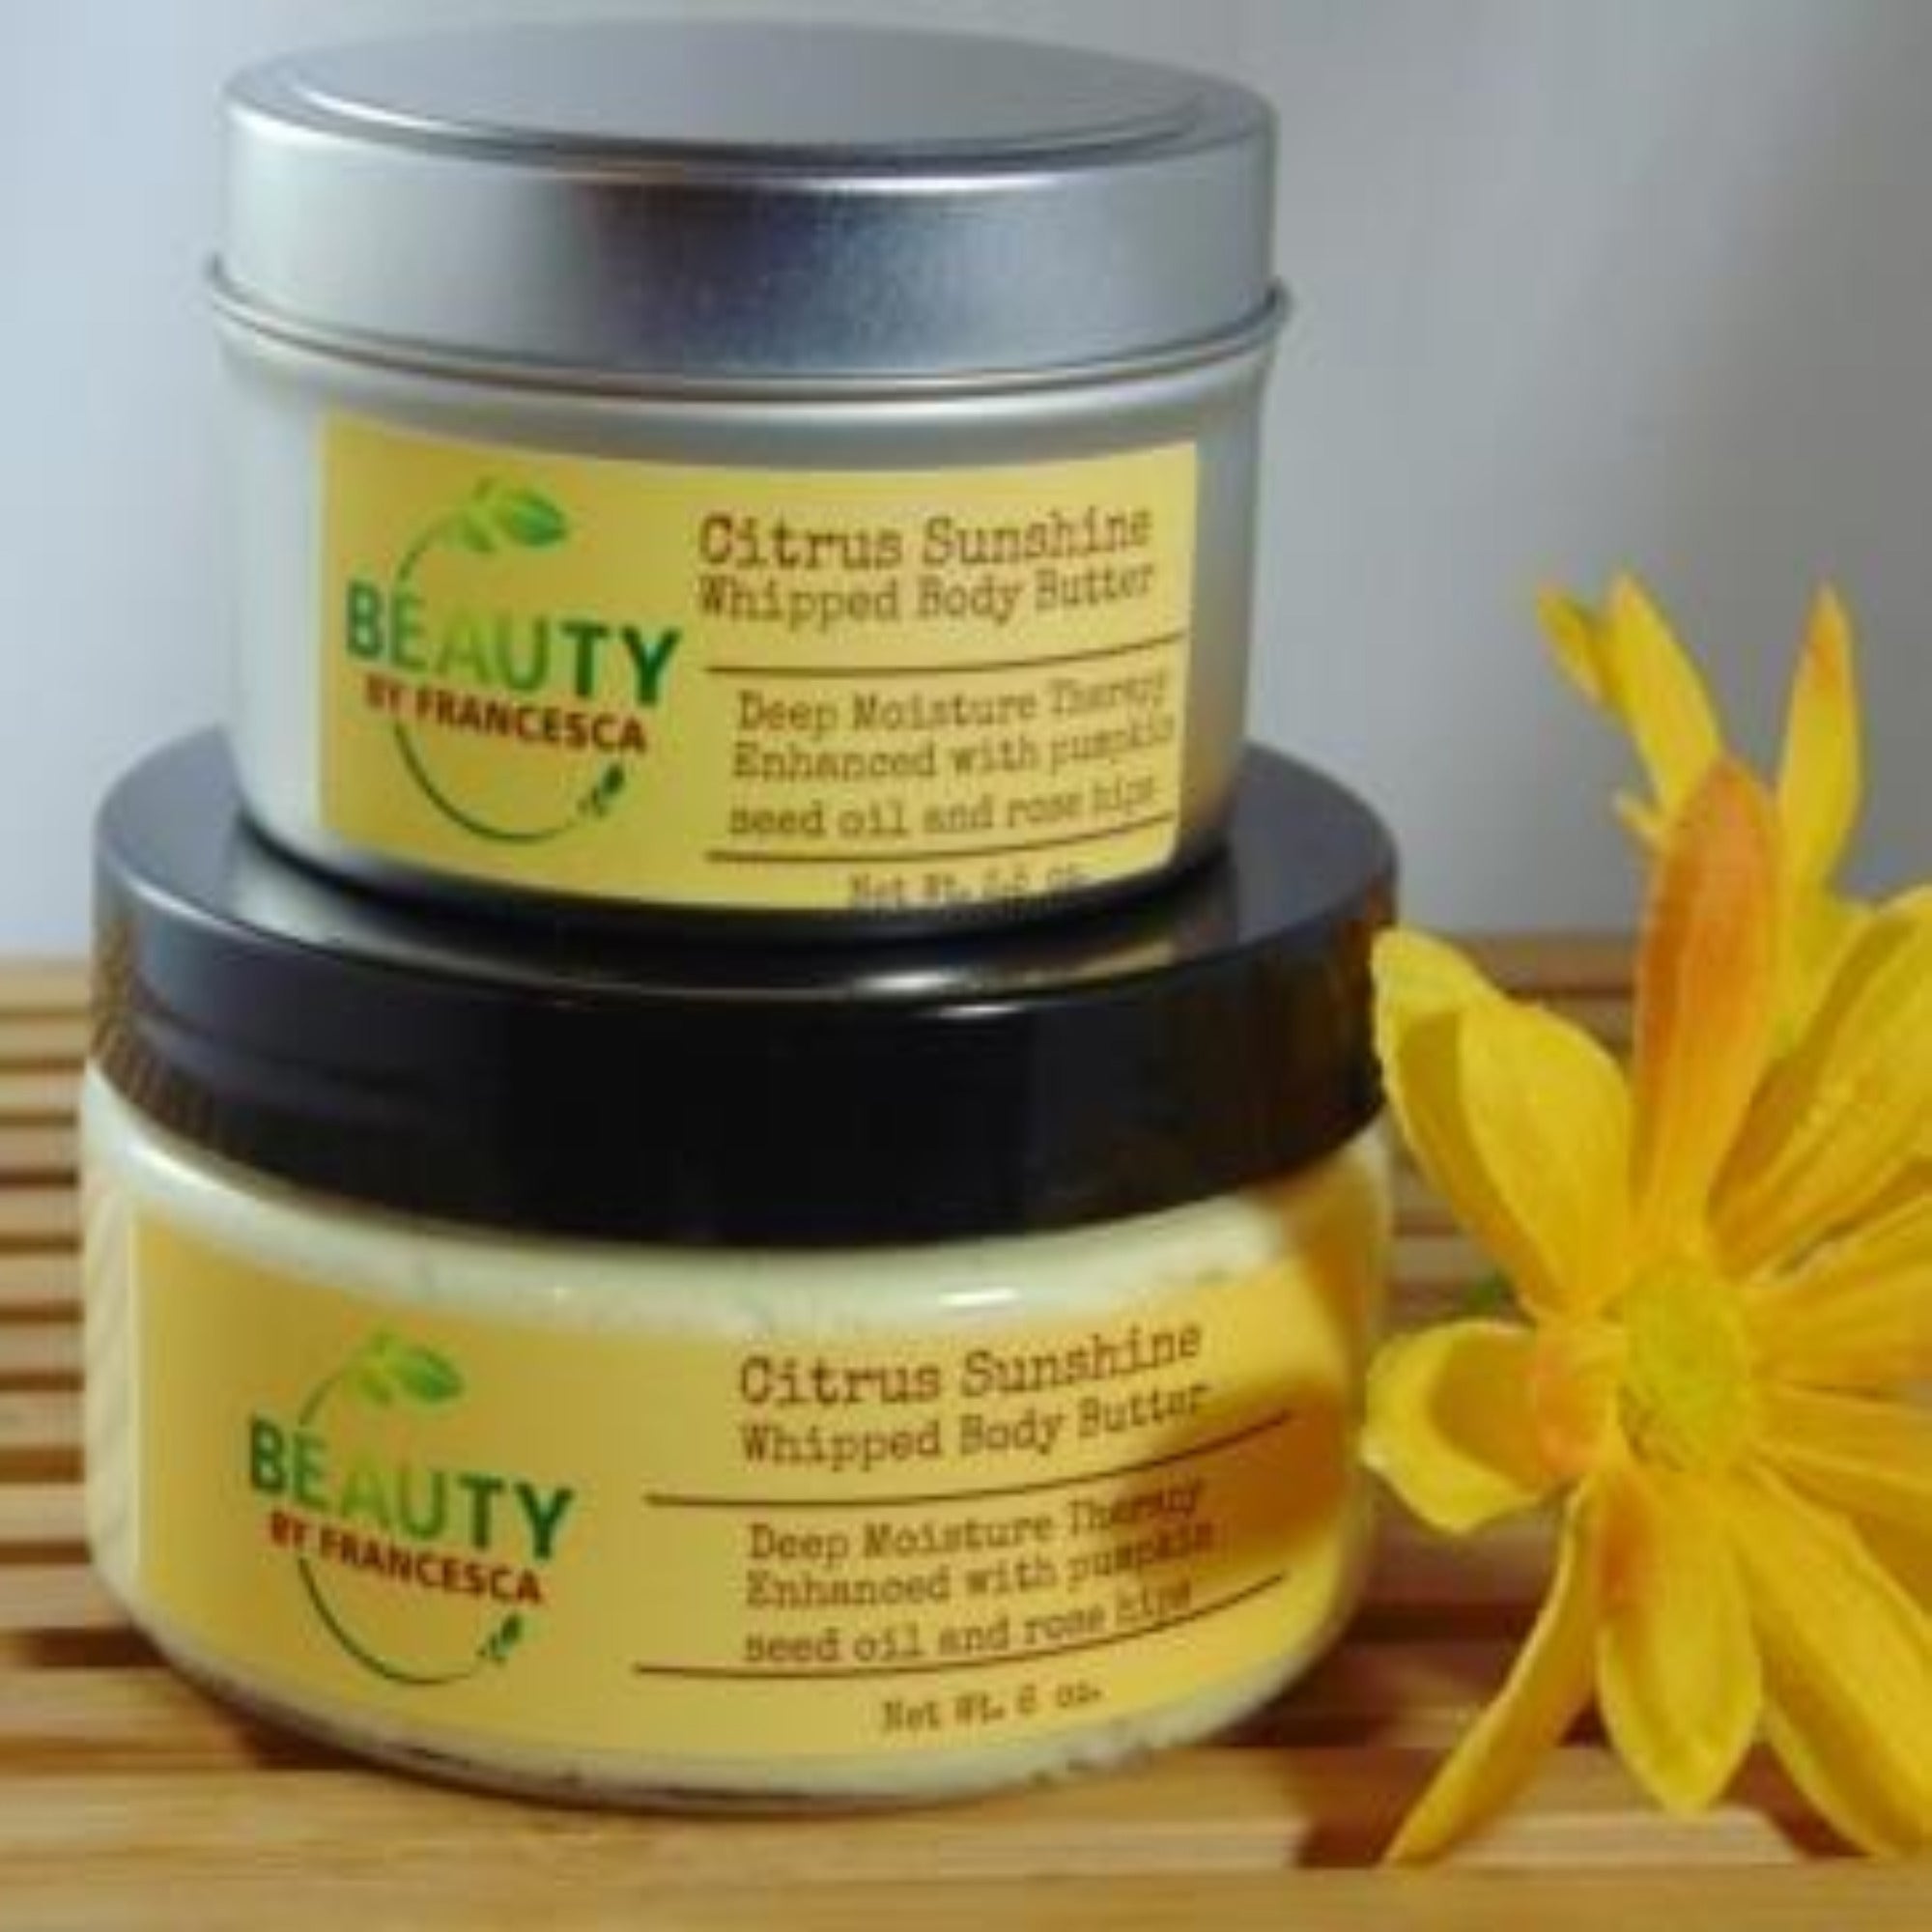 whipped body butter citrus sunshine 3 oz and 6 oz front view